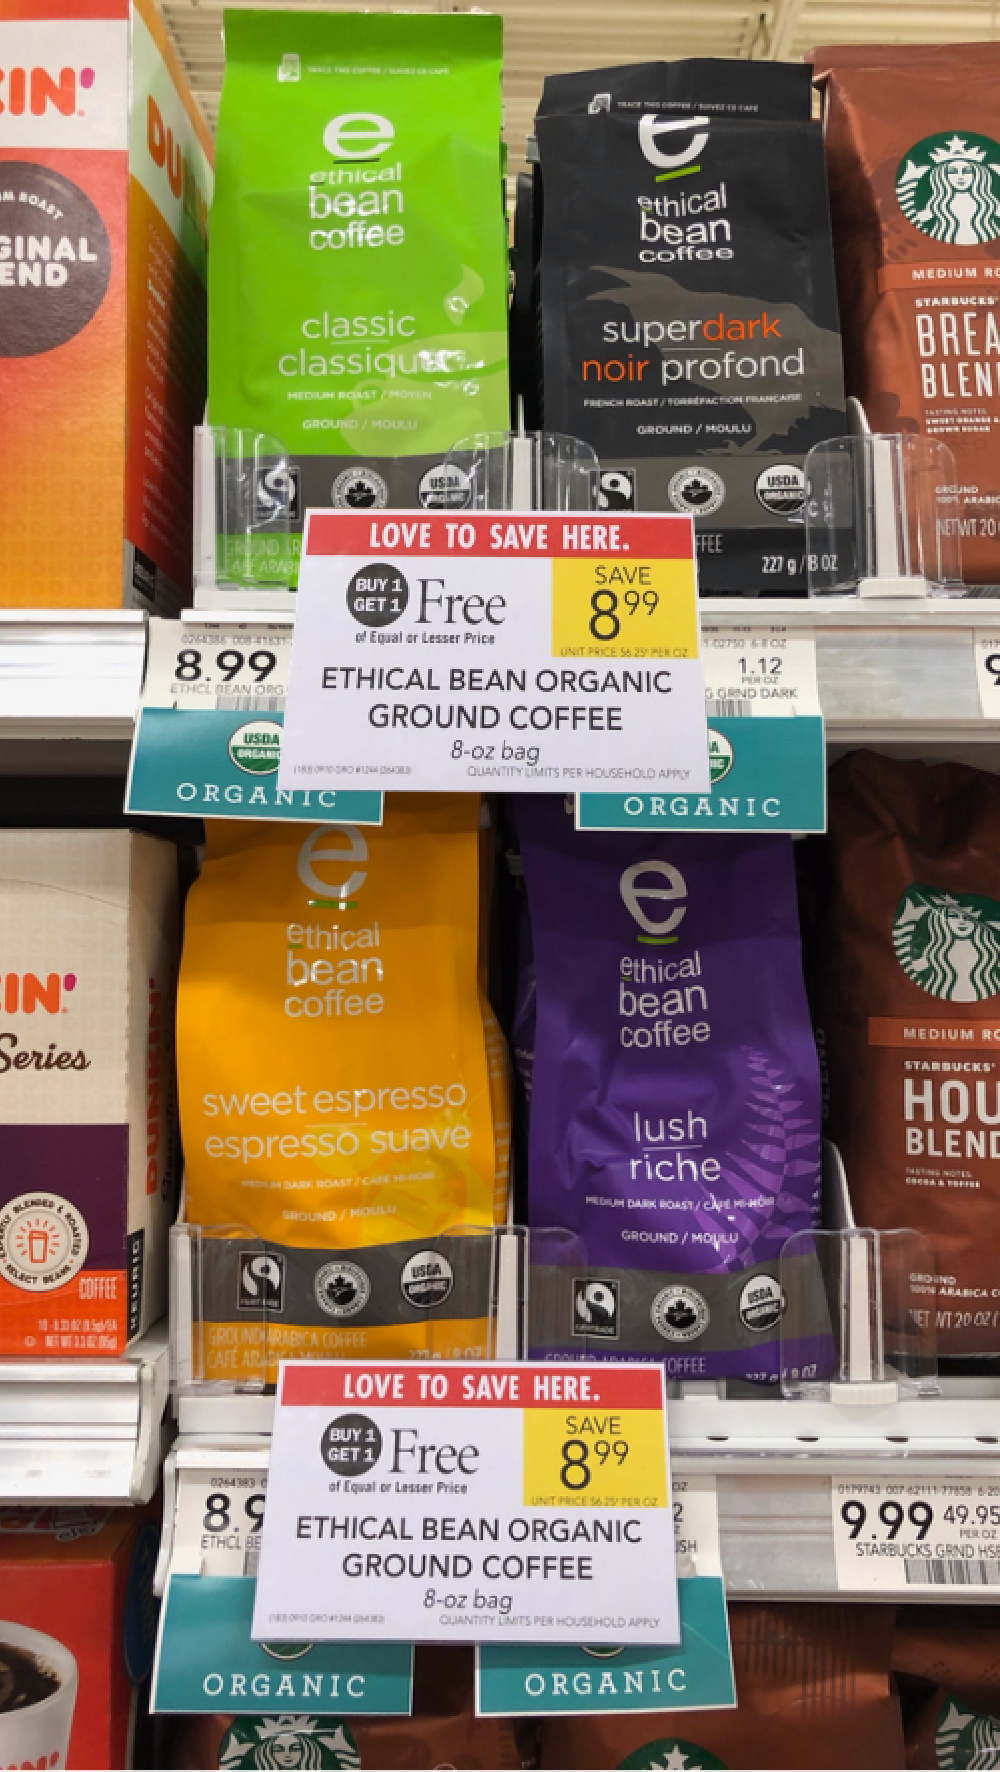 Ethical Bean Coffee Is Buy One, Get One FREE This Week At Publix on I Heart Publix 1